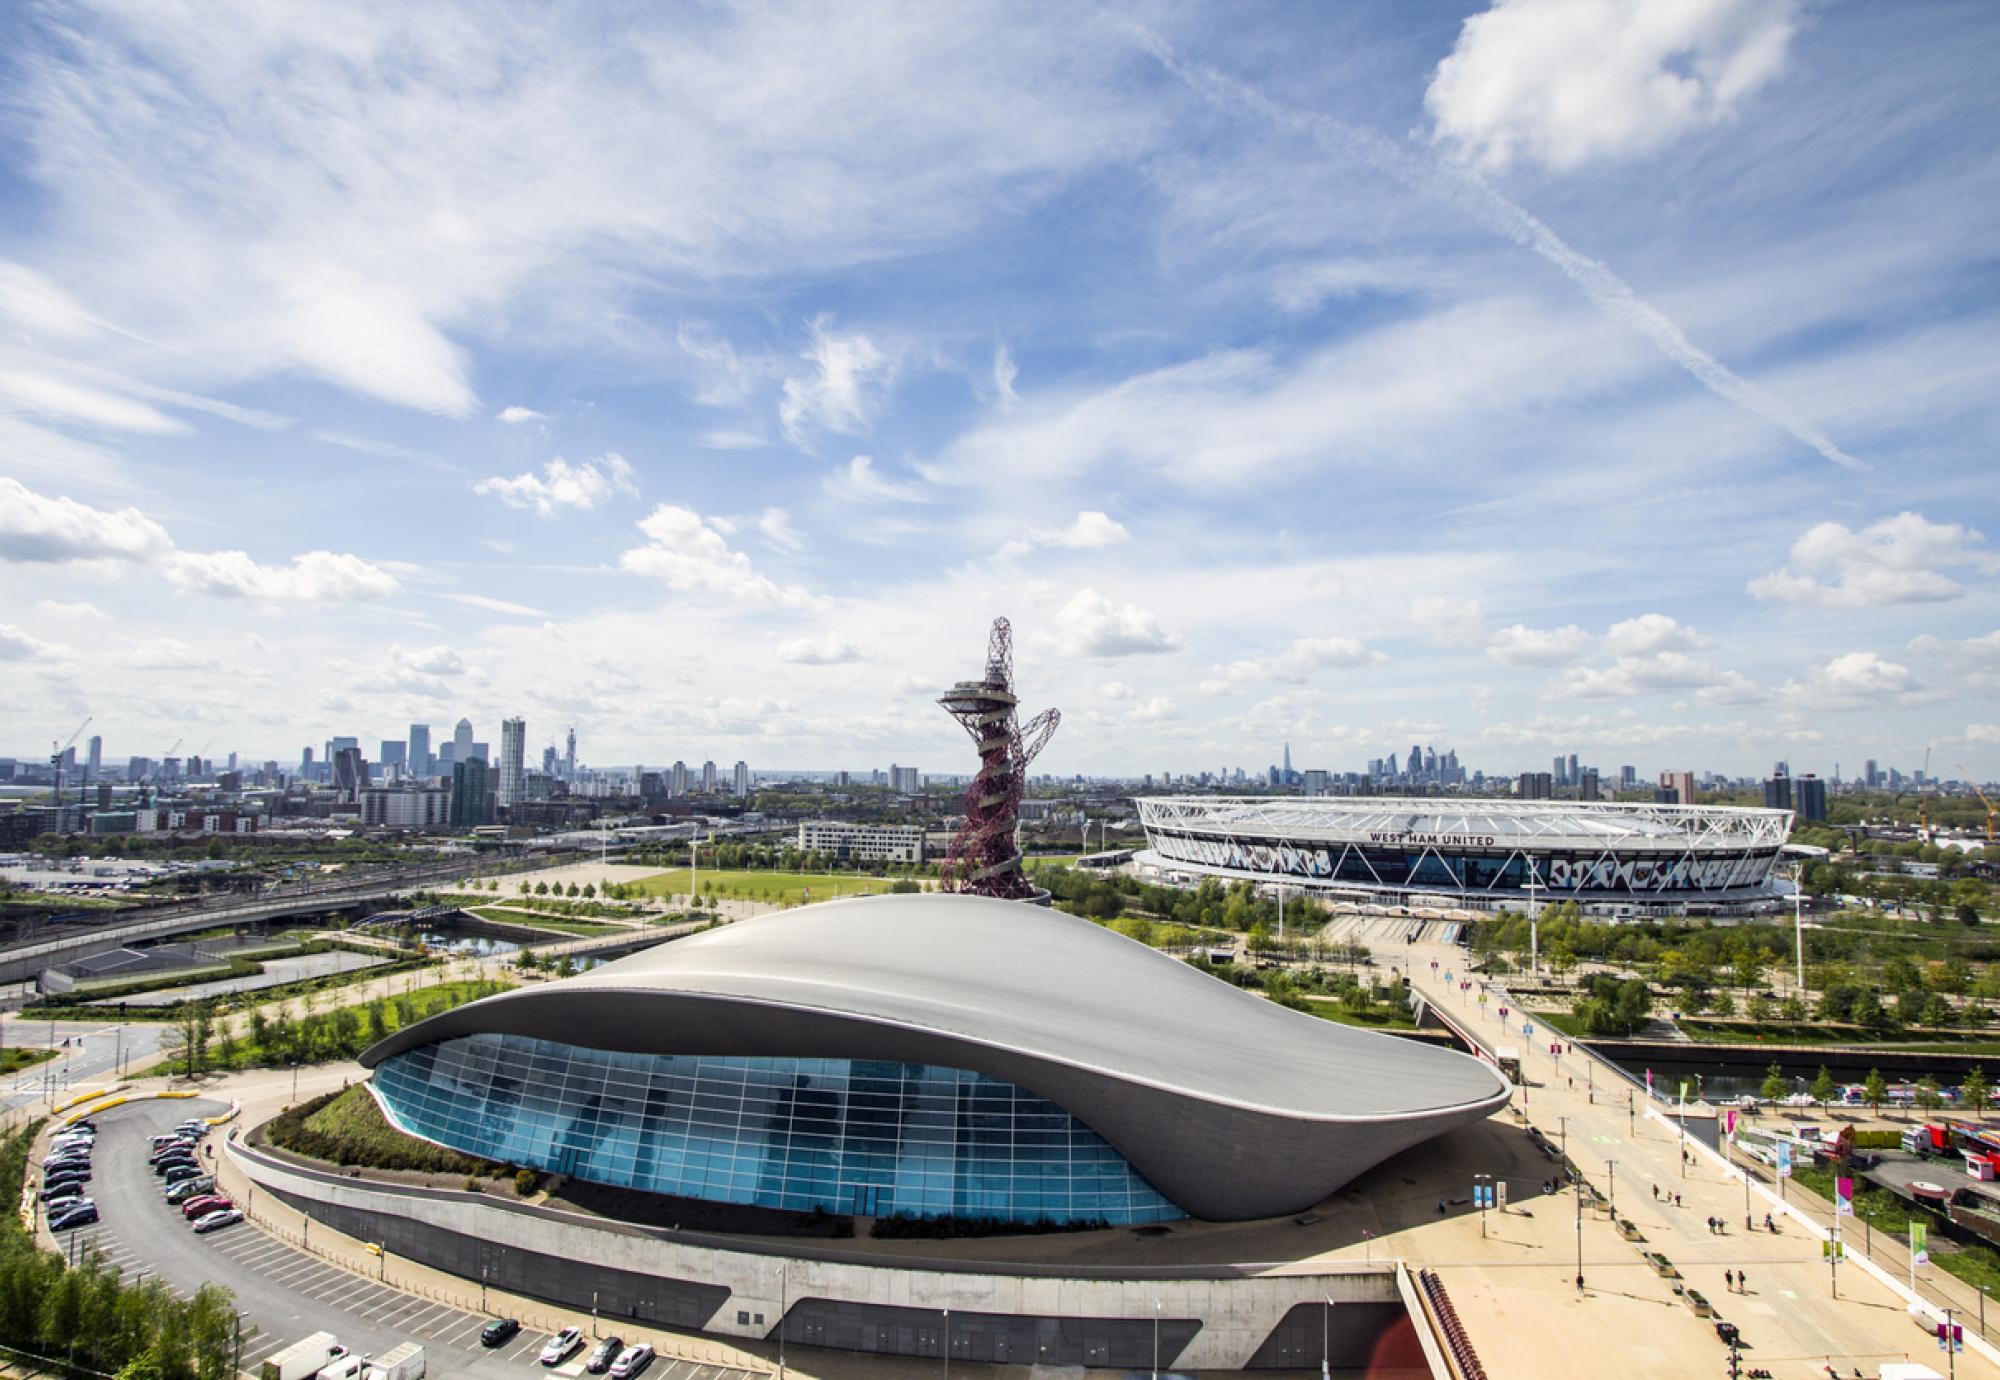 View of the aquatics centre and London Stadium in Newham